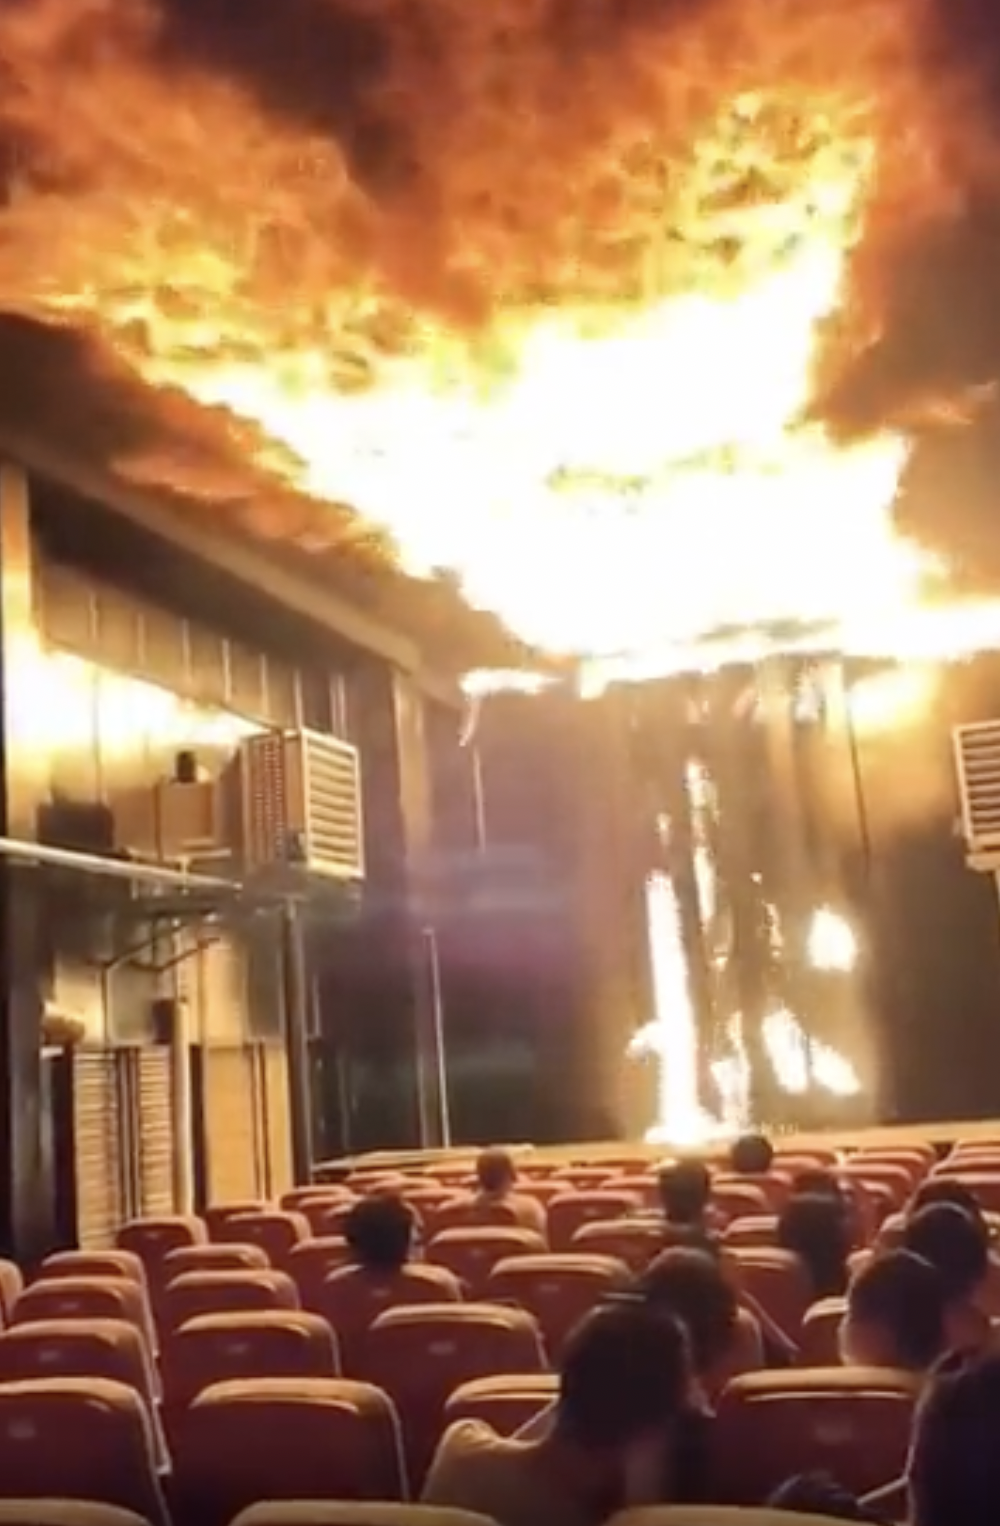 Fire effect in “5D” theater. 